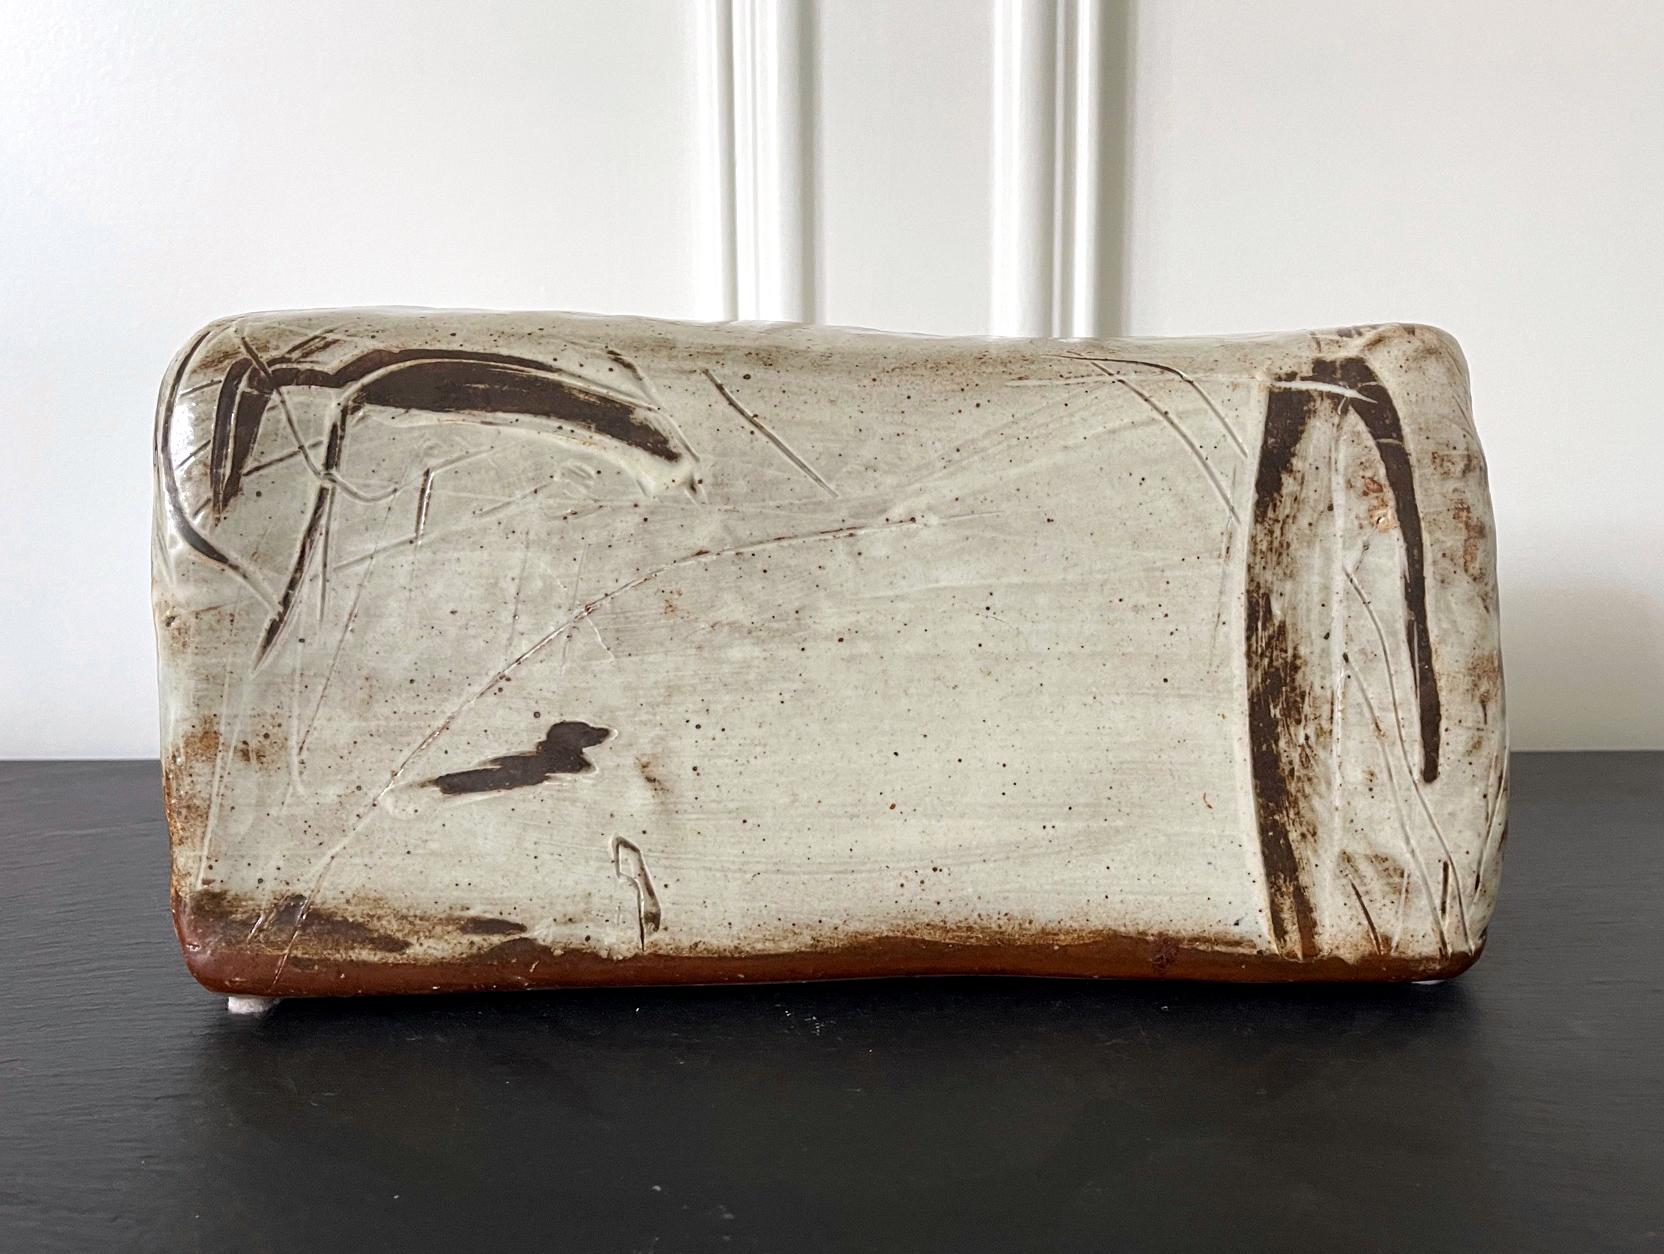 A ceramic sculpture piece created in the tradition of Buncheong ware by contemporary Korean ceramicist Sung Jae Choi (South Korean, b. 1962). In a hollow rectangular with slight irregularity of being hand-made, the piece evokes the distant memory of